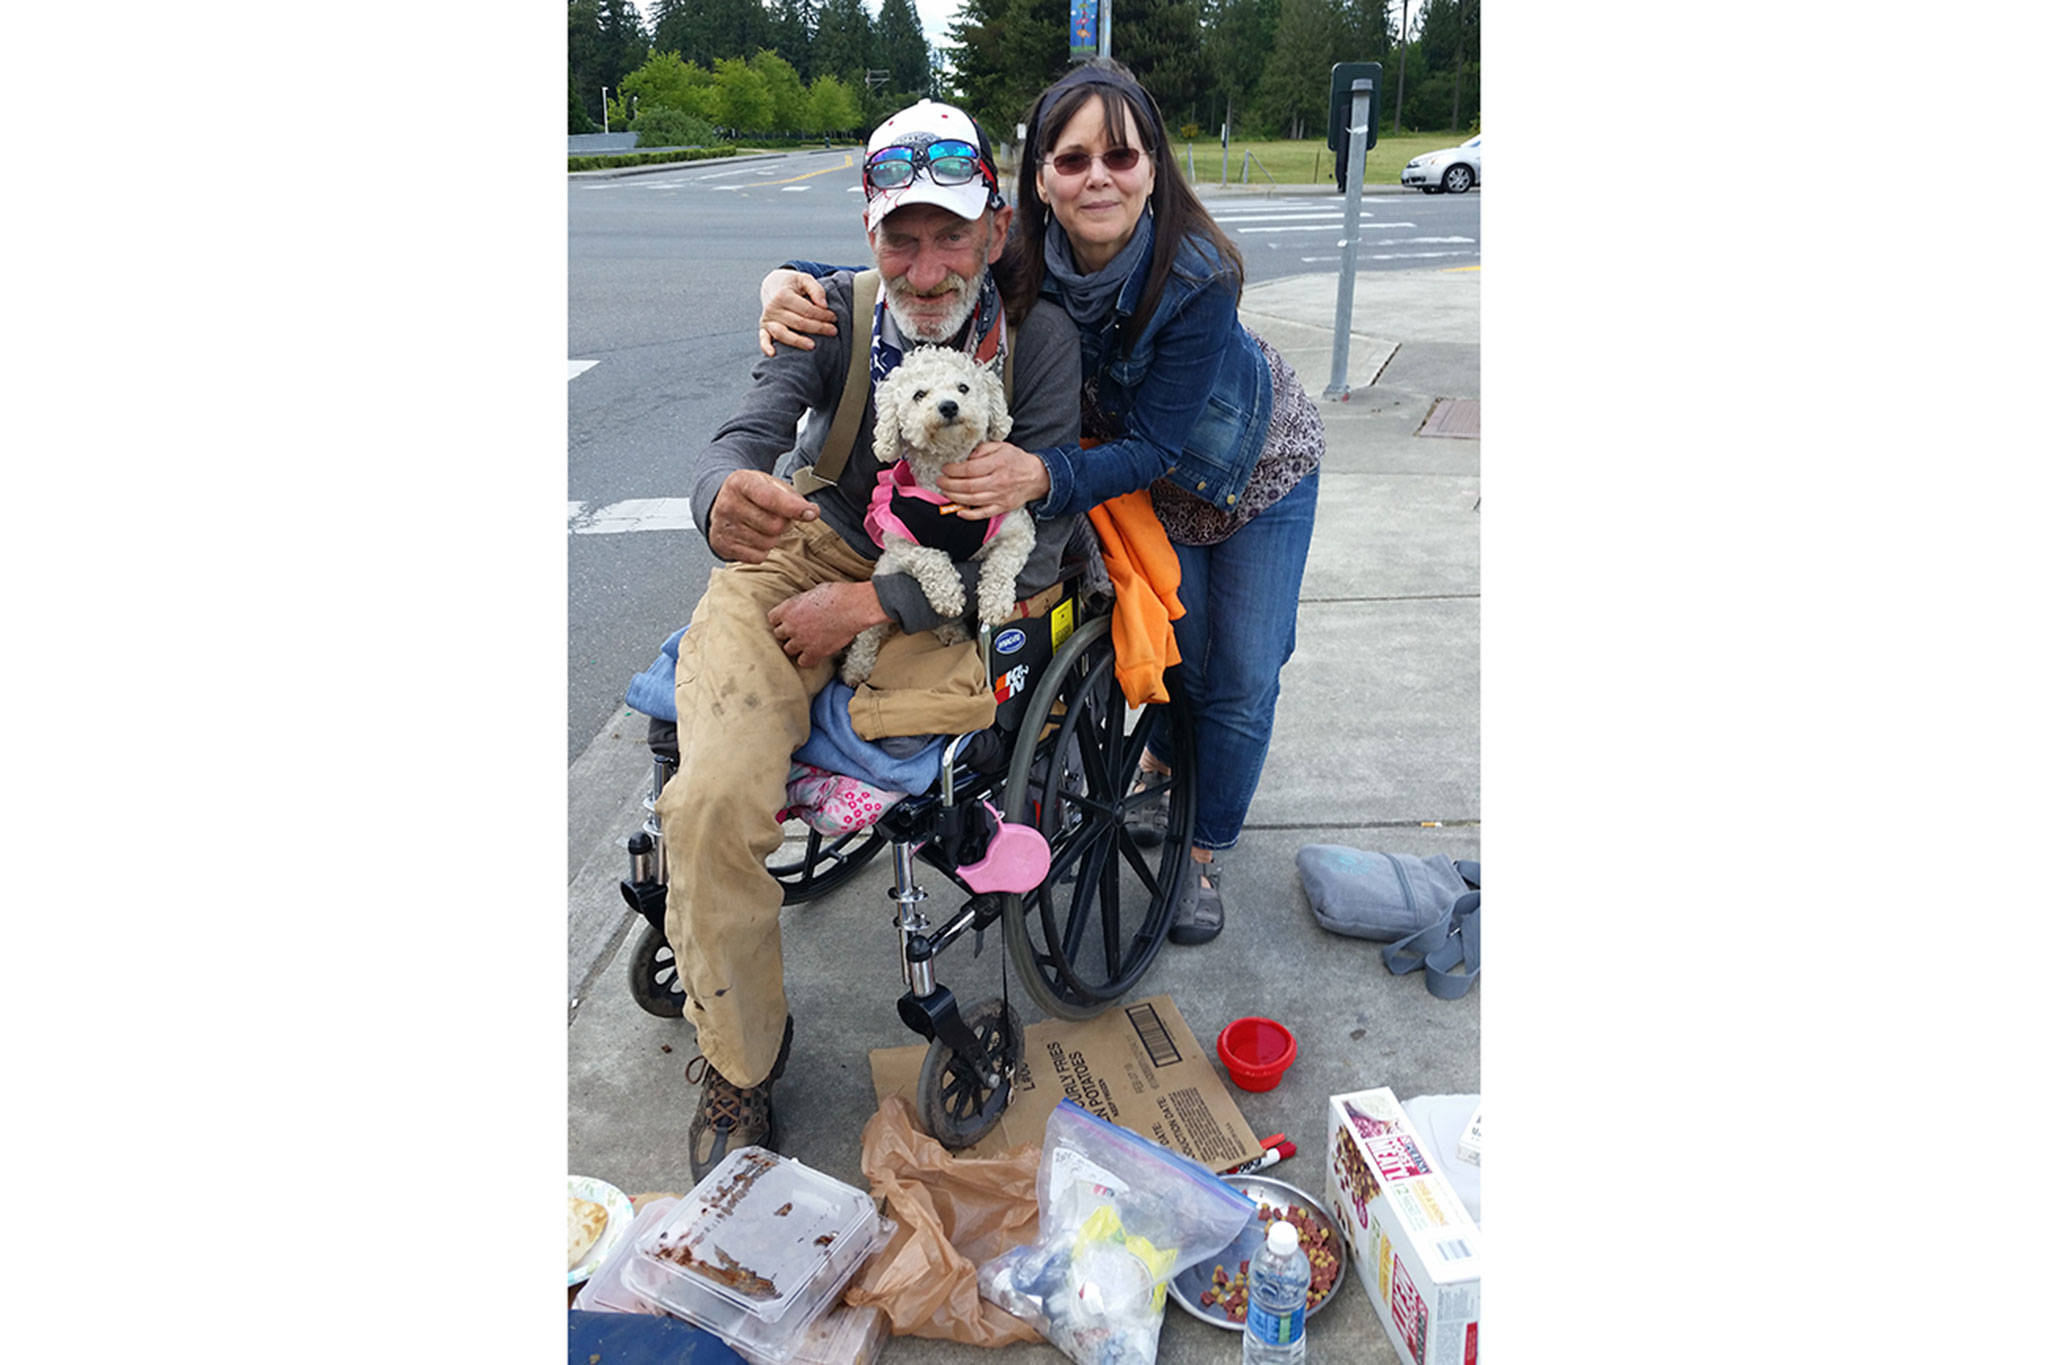 Don’t give money; tailgate with the homeless